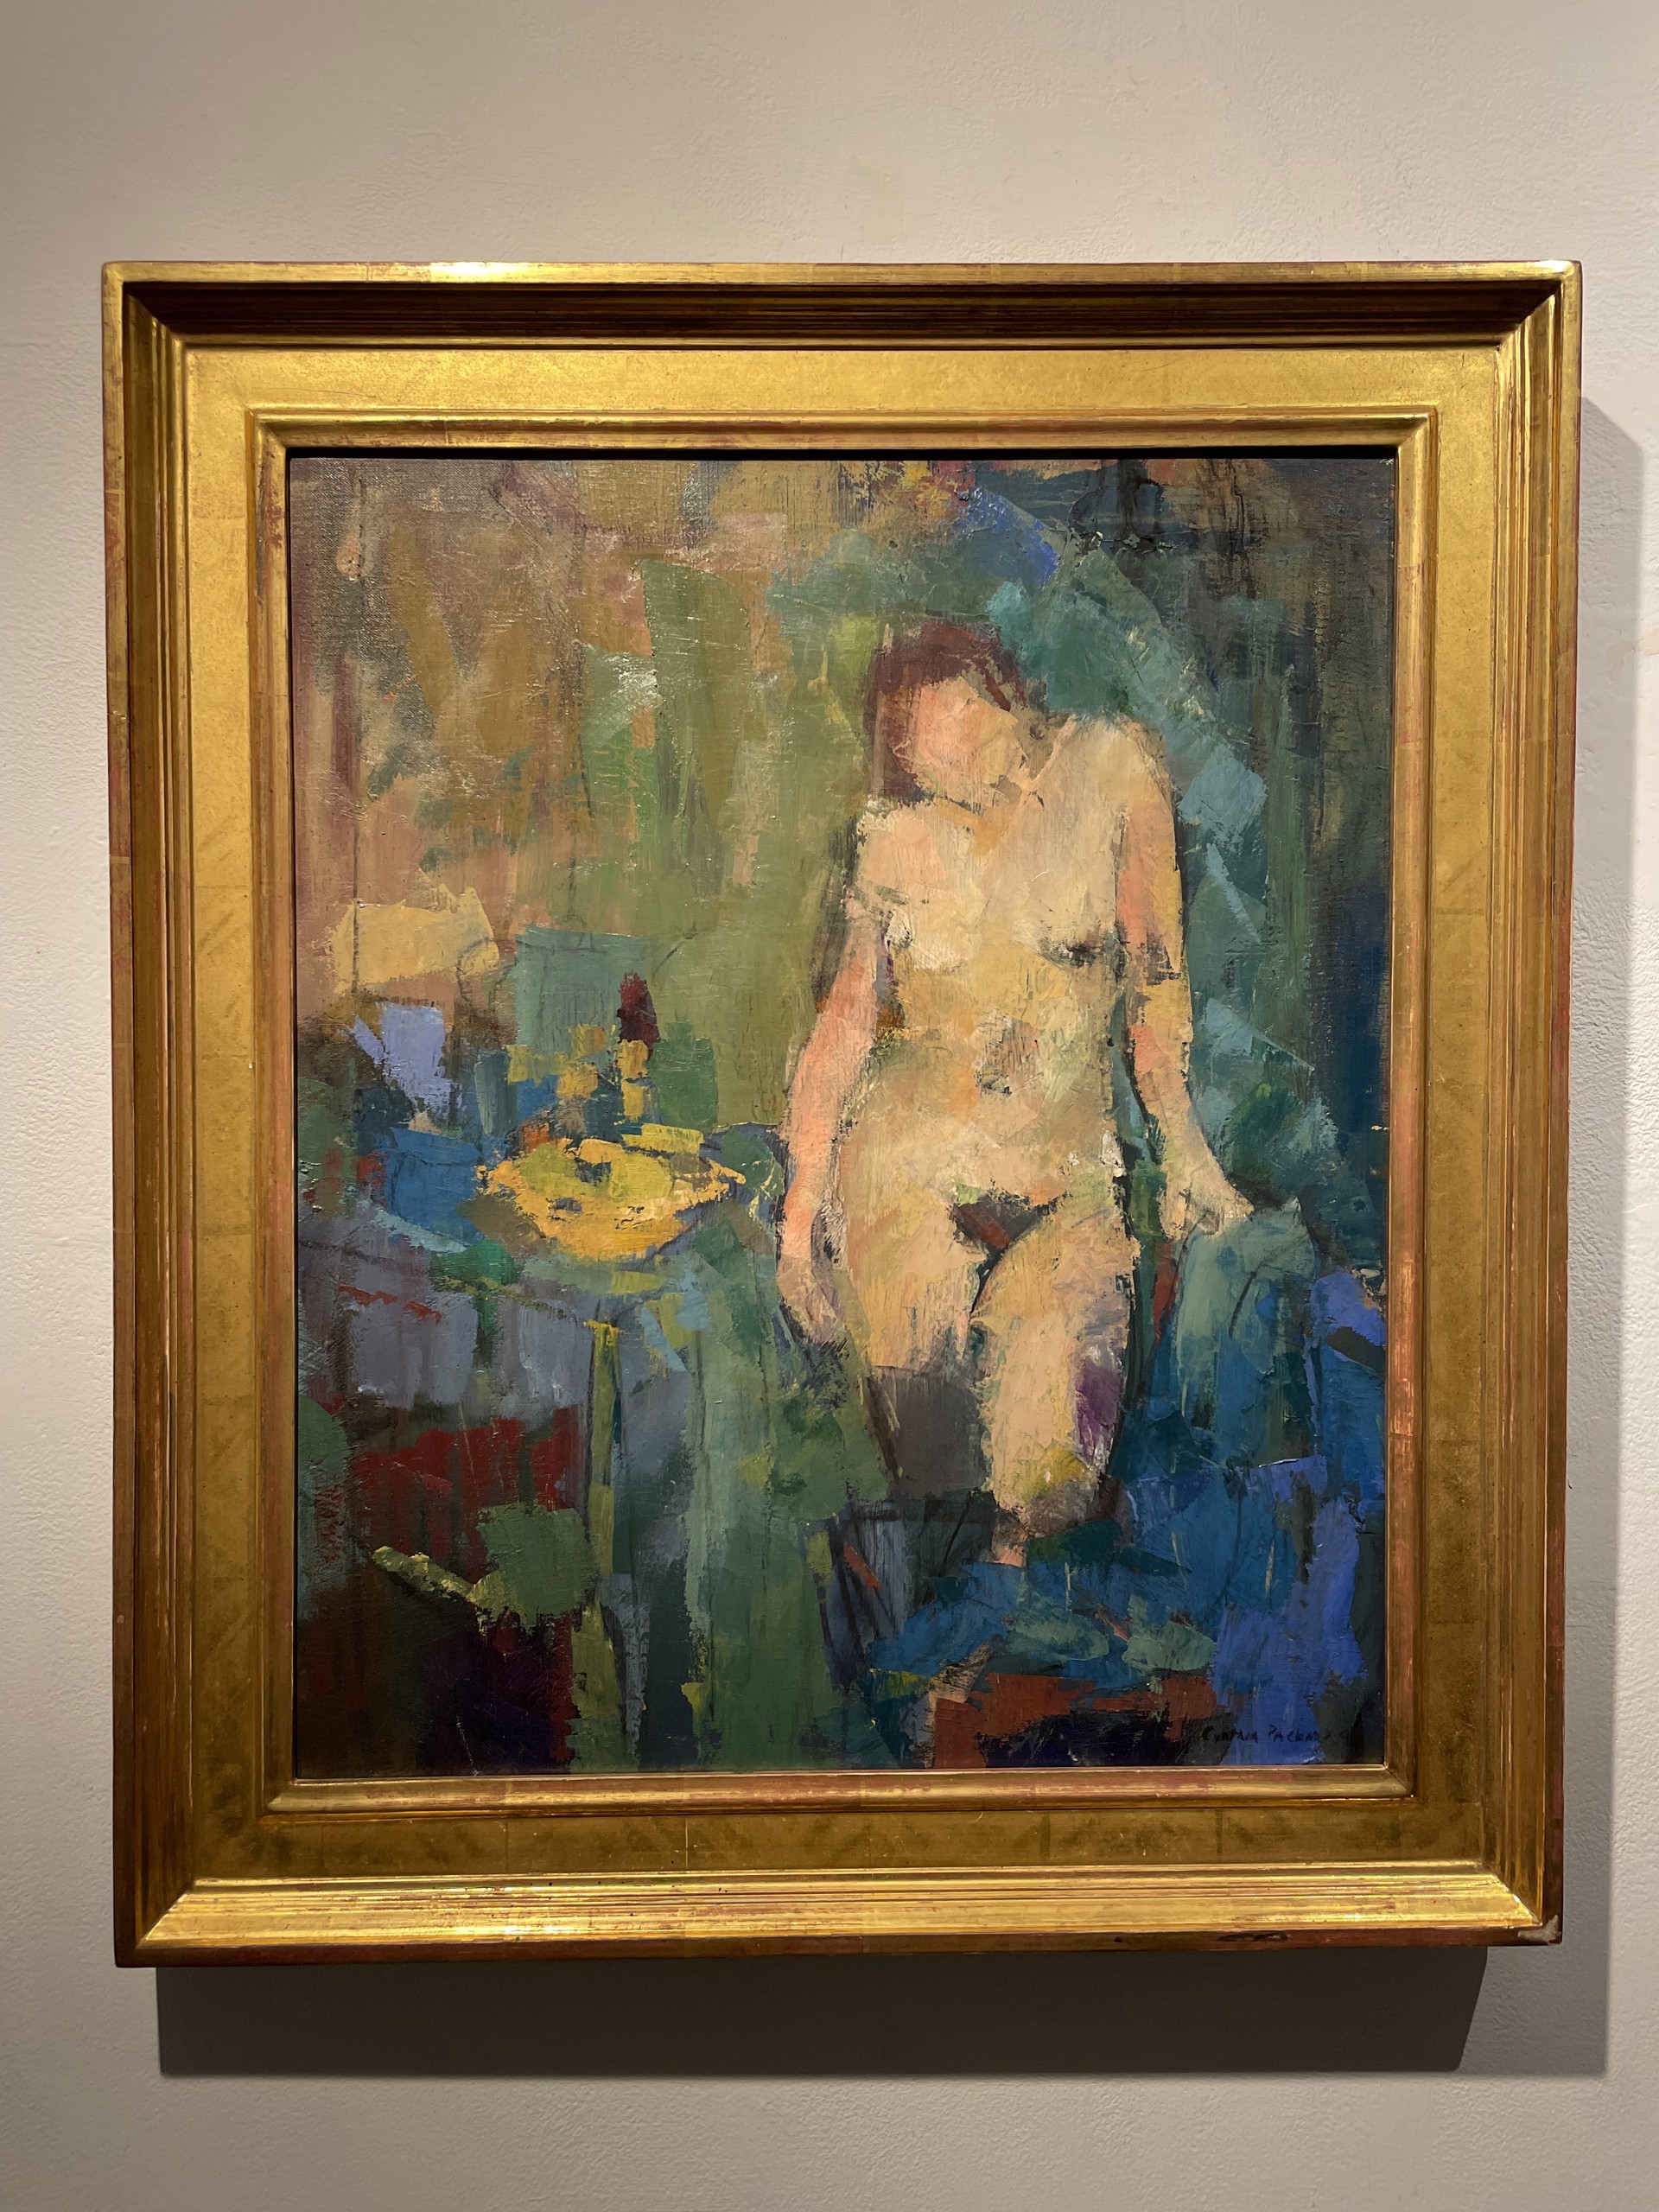 Nude in an Interior by Cynthia Packard